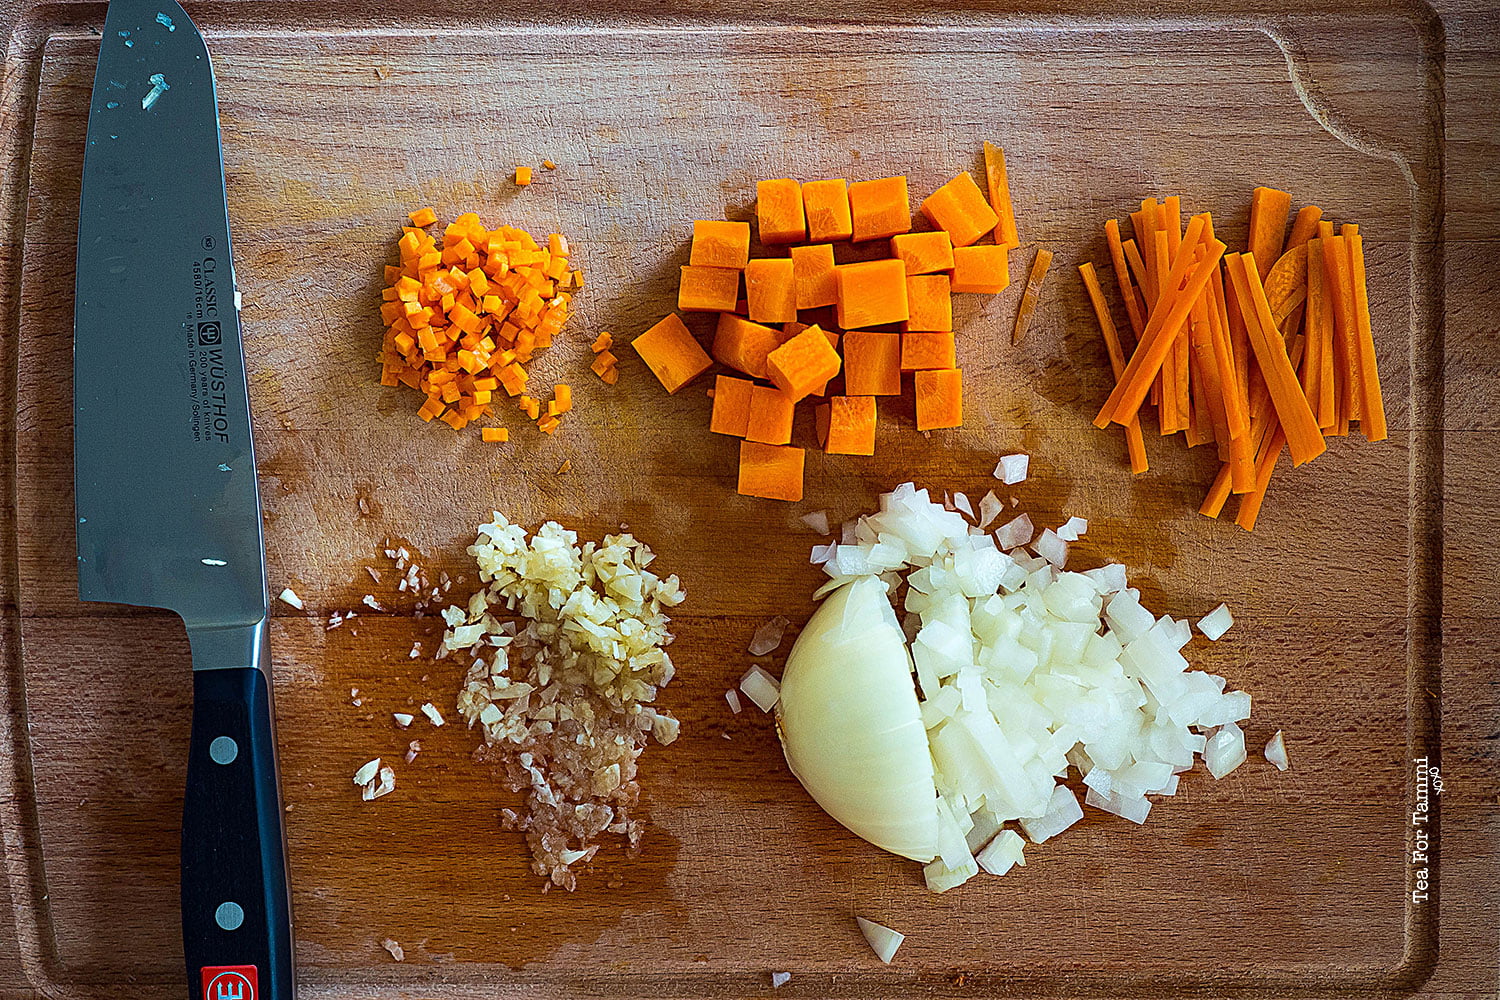 7 Steps to chopping like a chef!